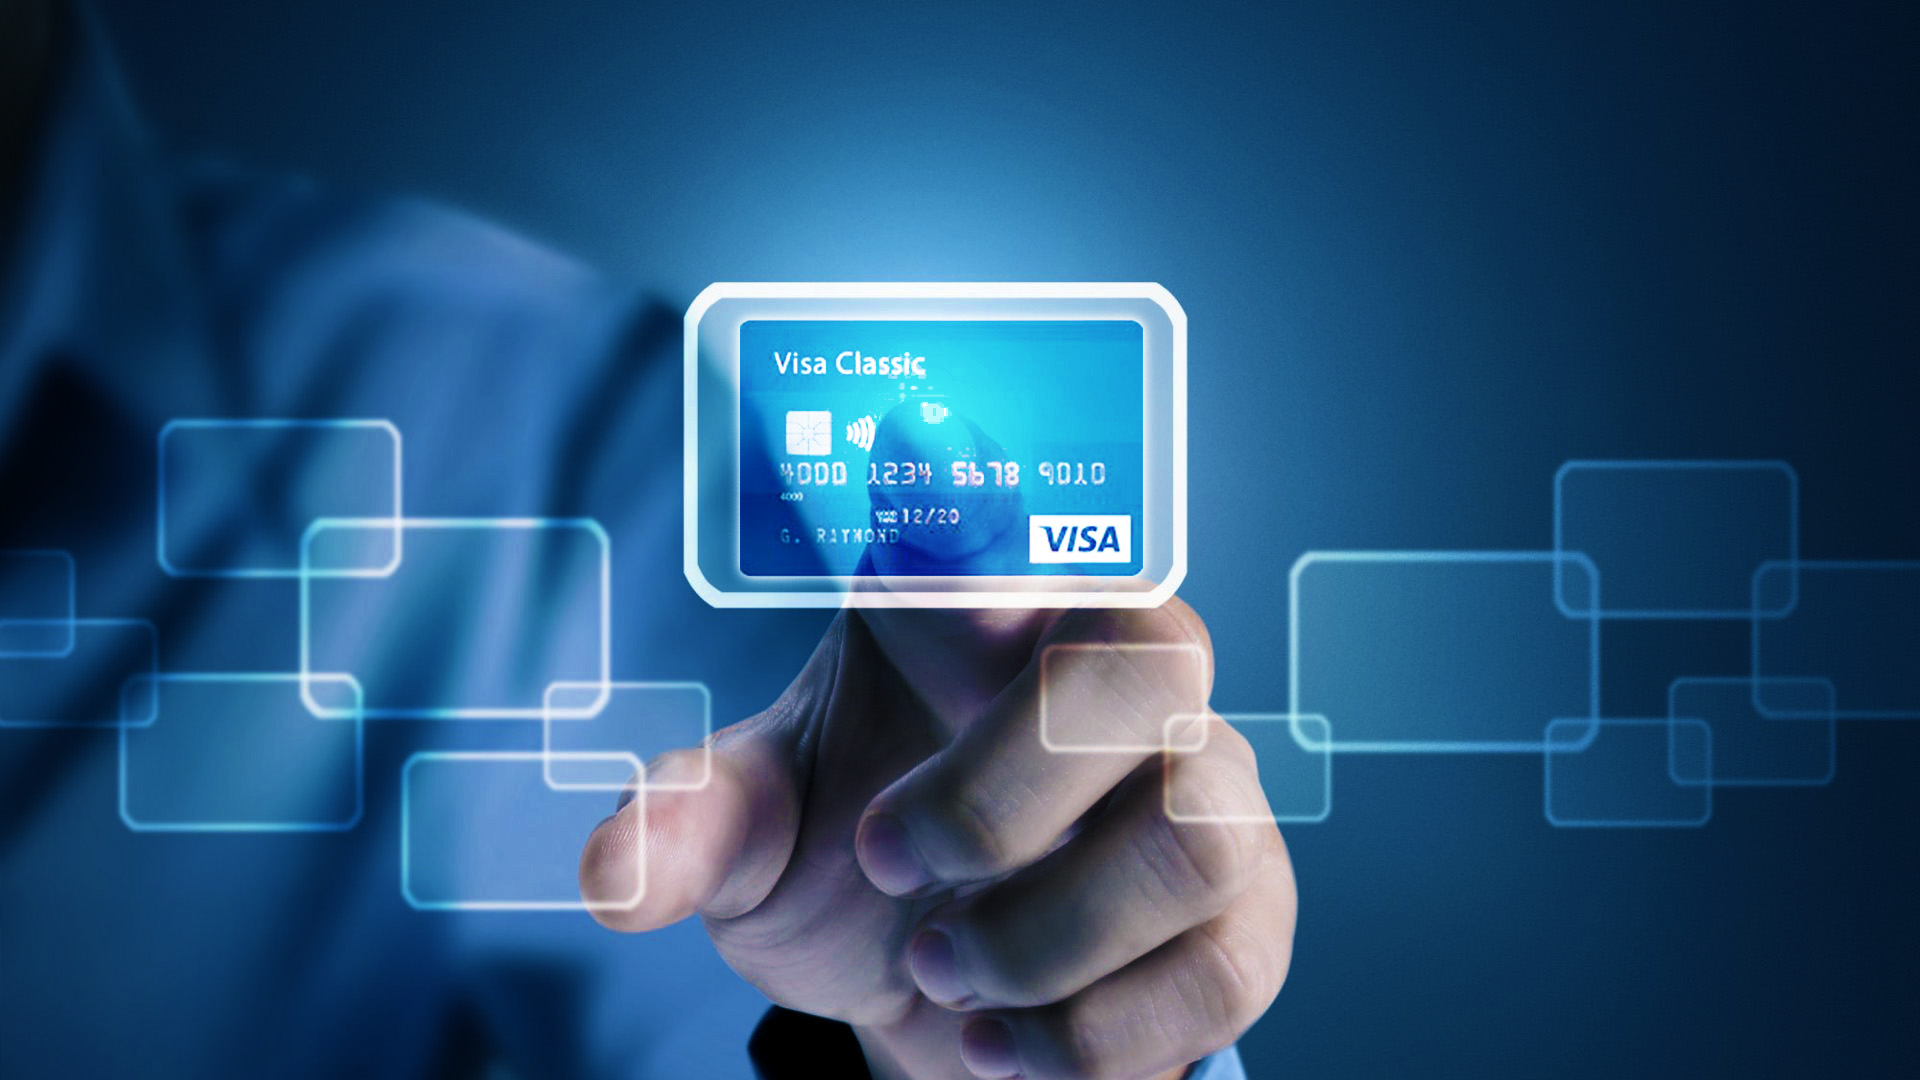 How to buy a virtual Visa credit card with cryptocurrencies